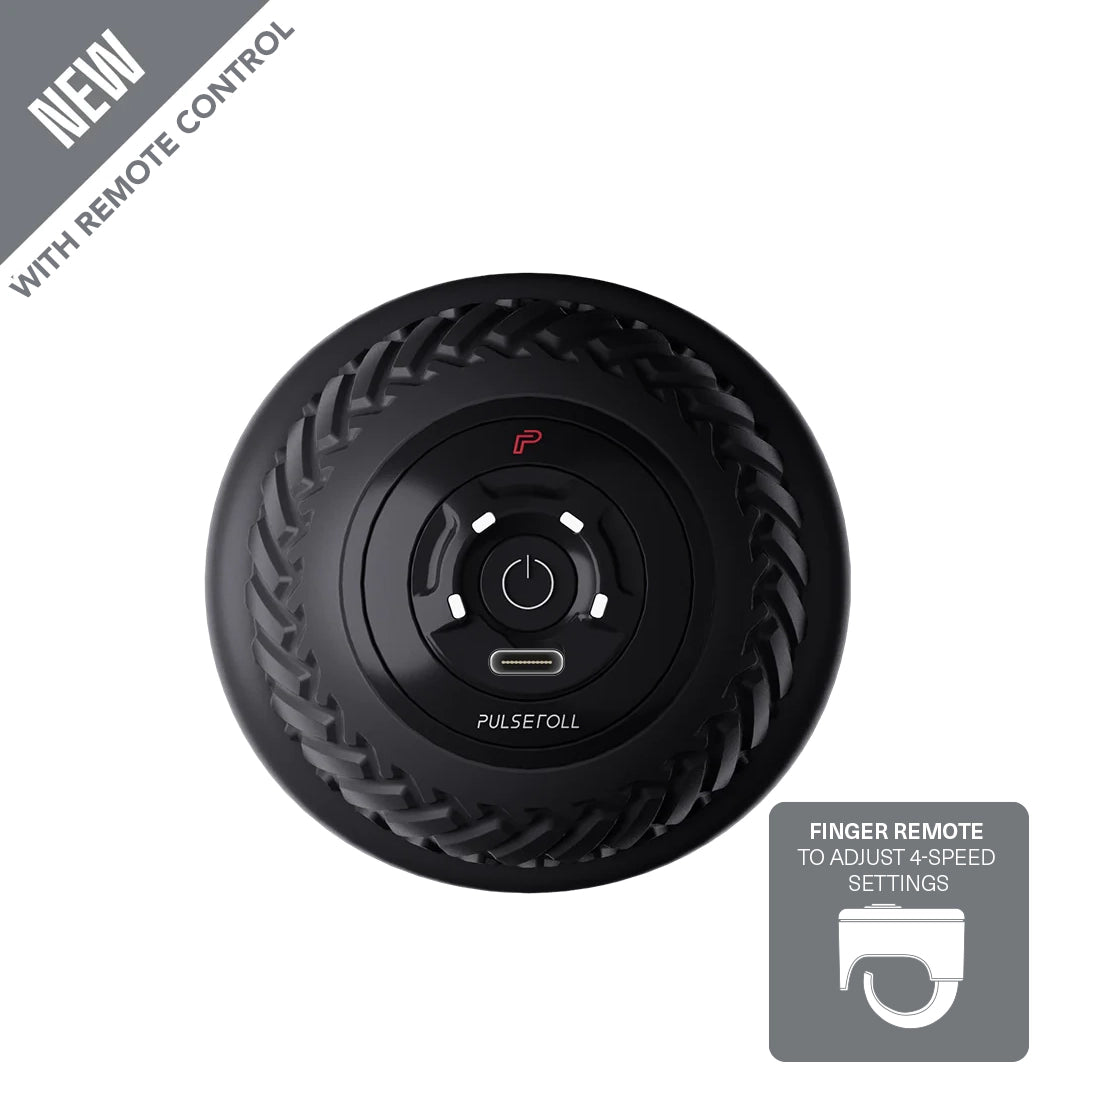 VYB Duo Roller - Pulseroll - Vibrating peanut ball - black colour - 4 speed settings - remote control